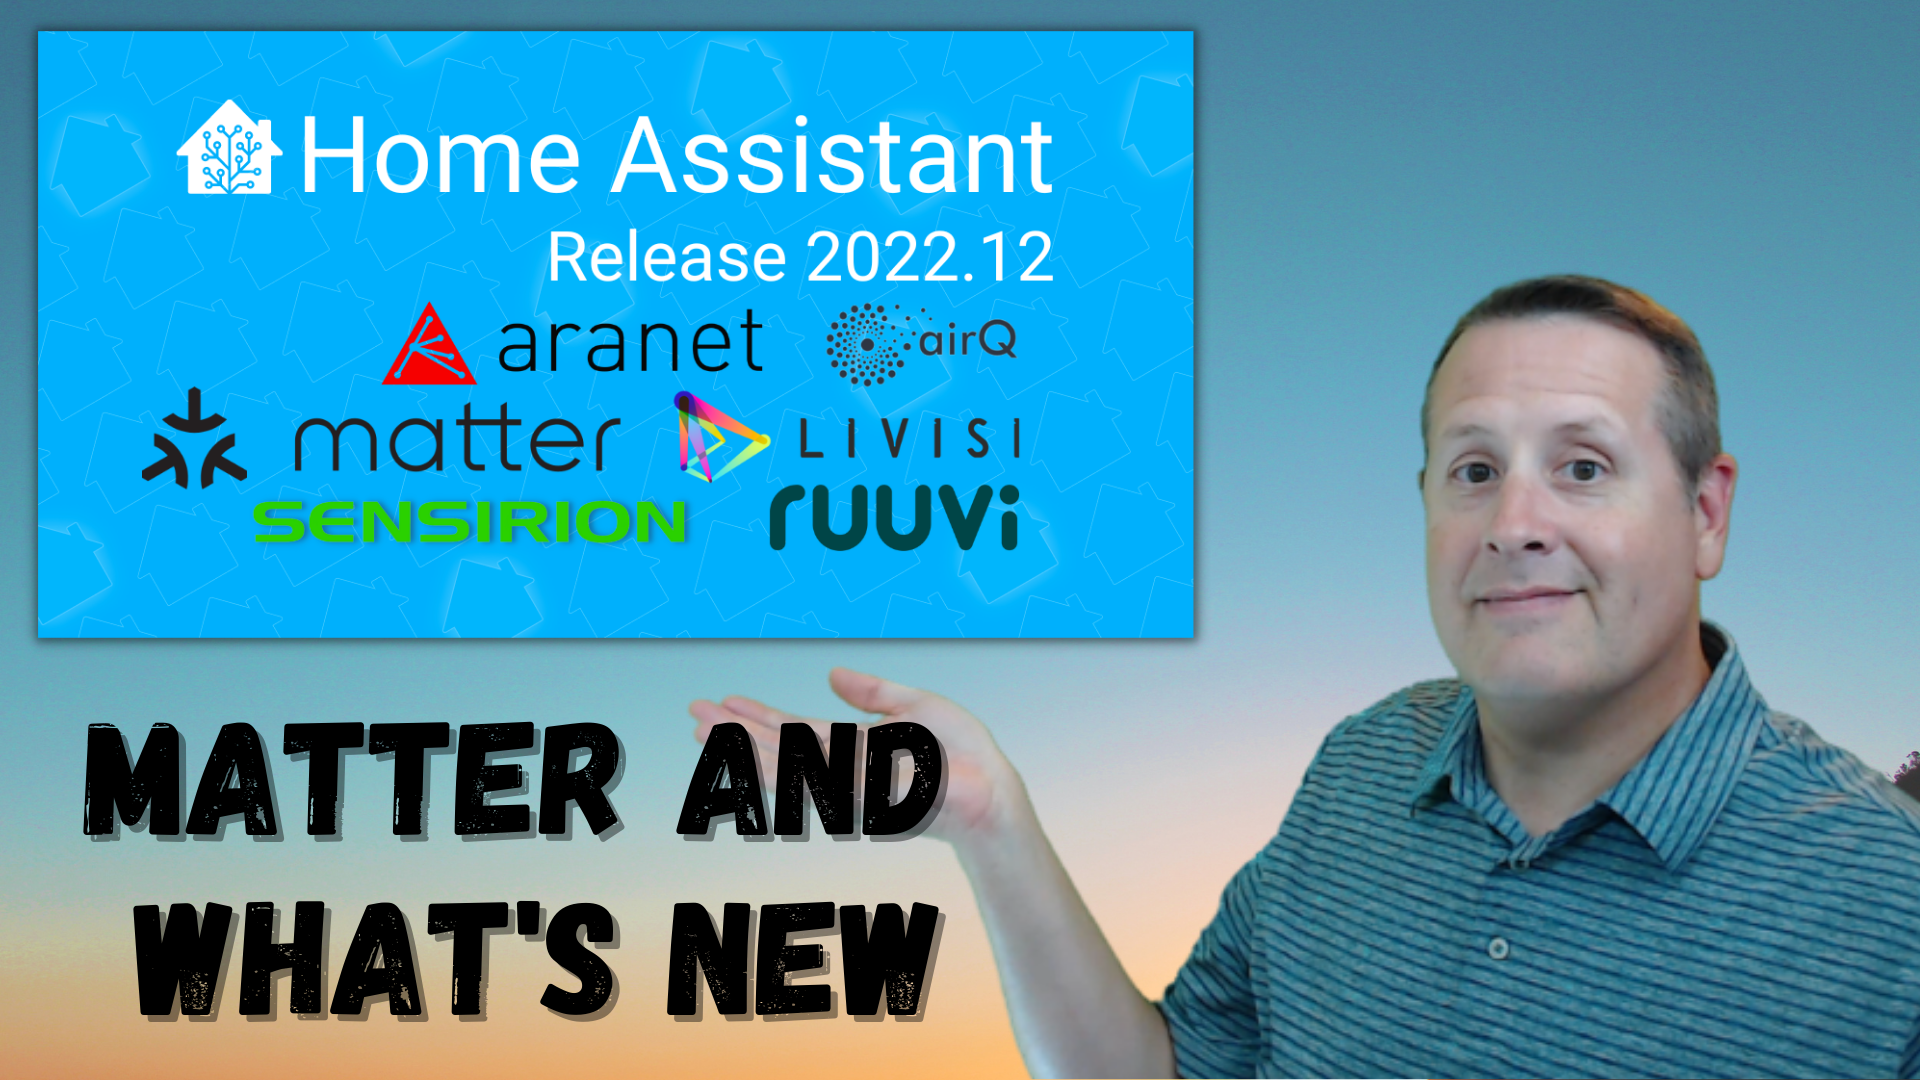 Home Assistant 2022.12 Update